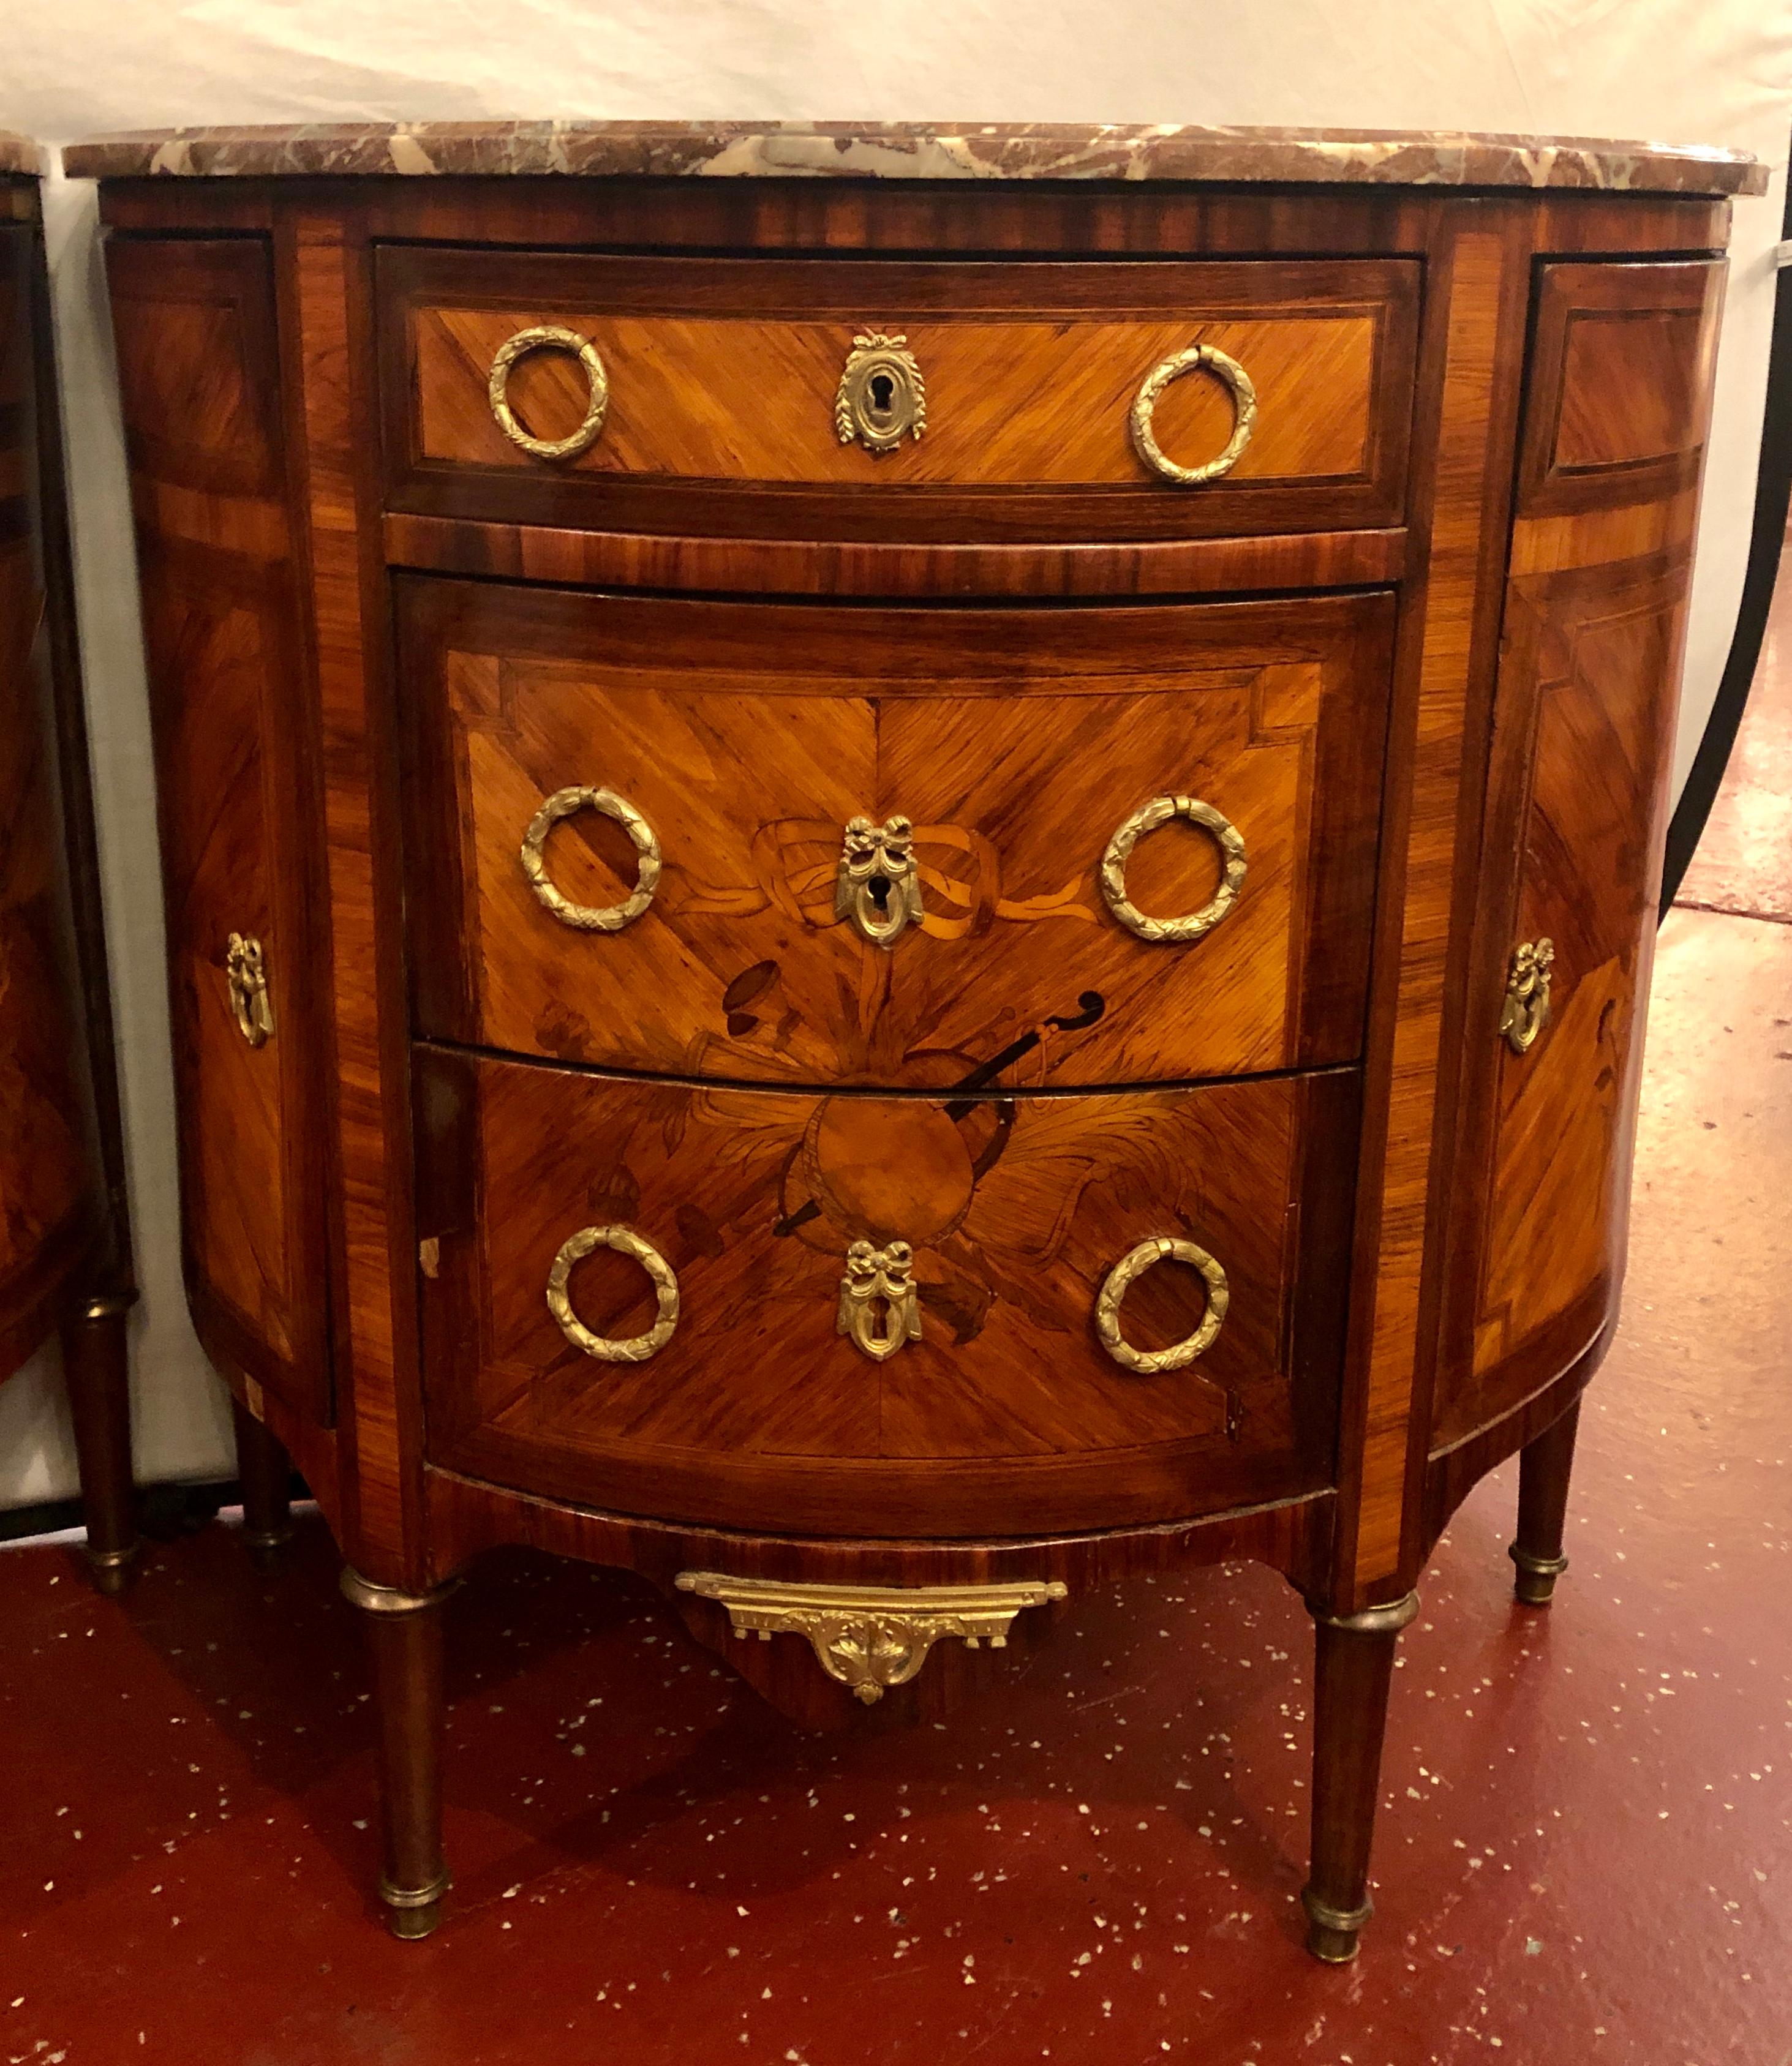 Pair of 19th century inlaid French marble top demilune commodes or nightstands. Each of these fine cabinets have musical theme inlaid in the wood with fine bronze mounts.